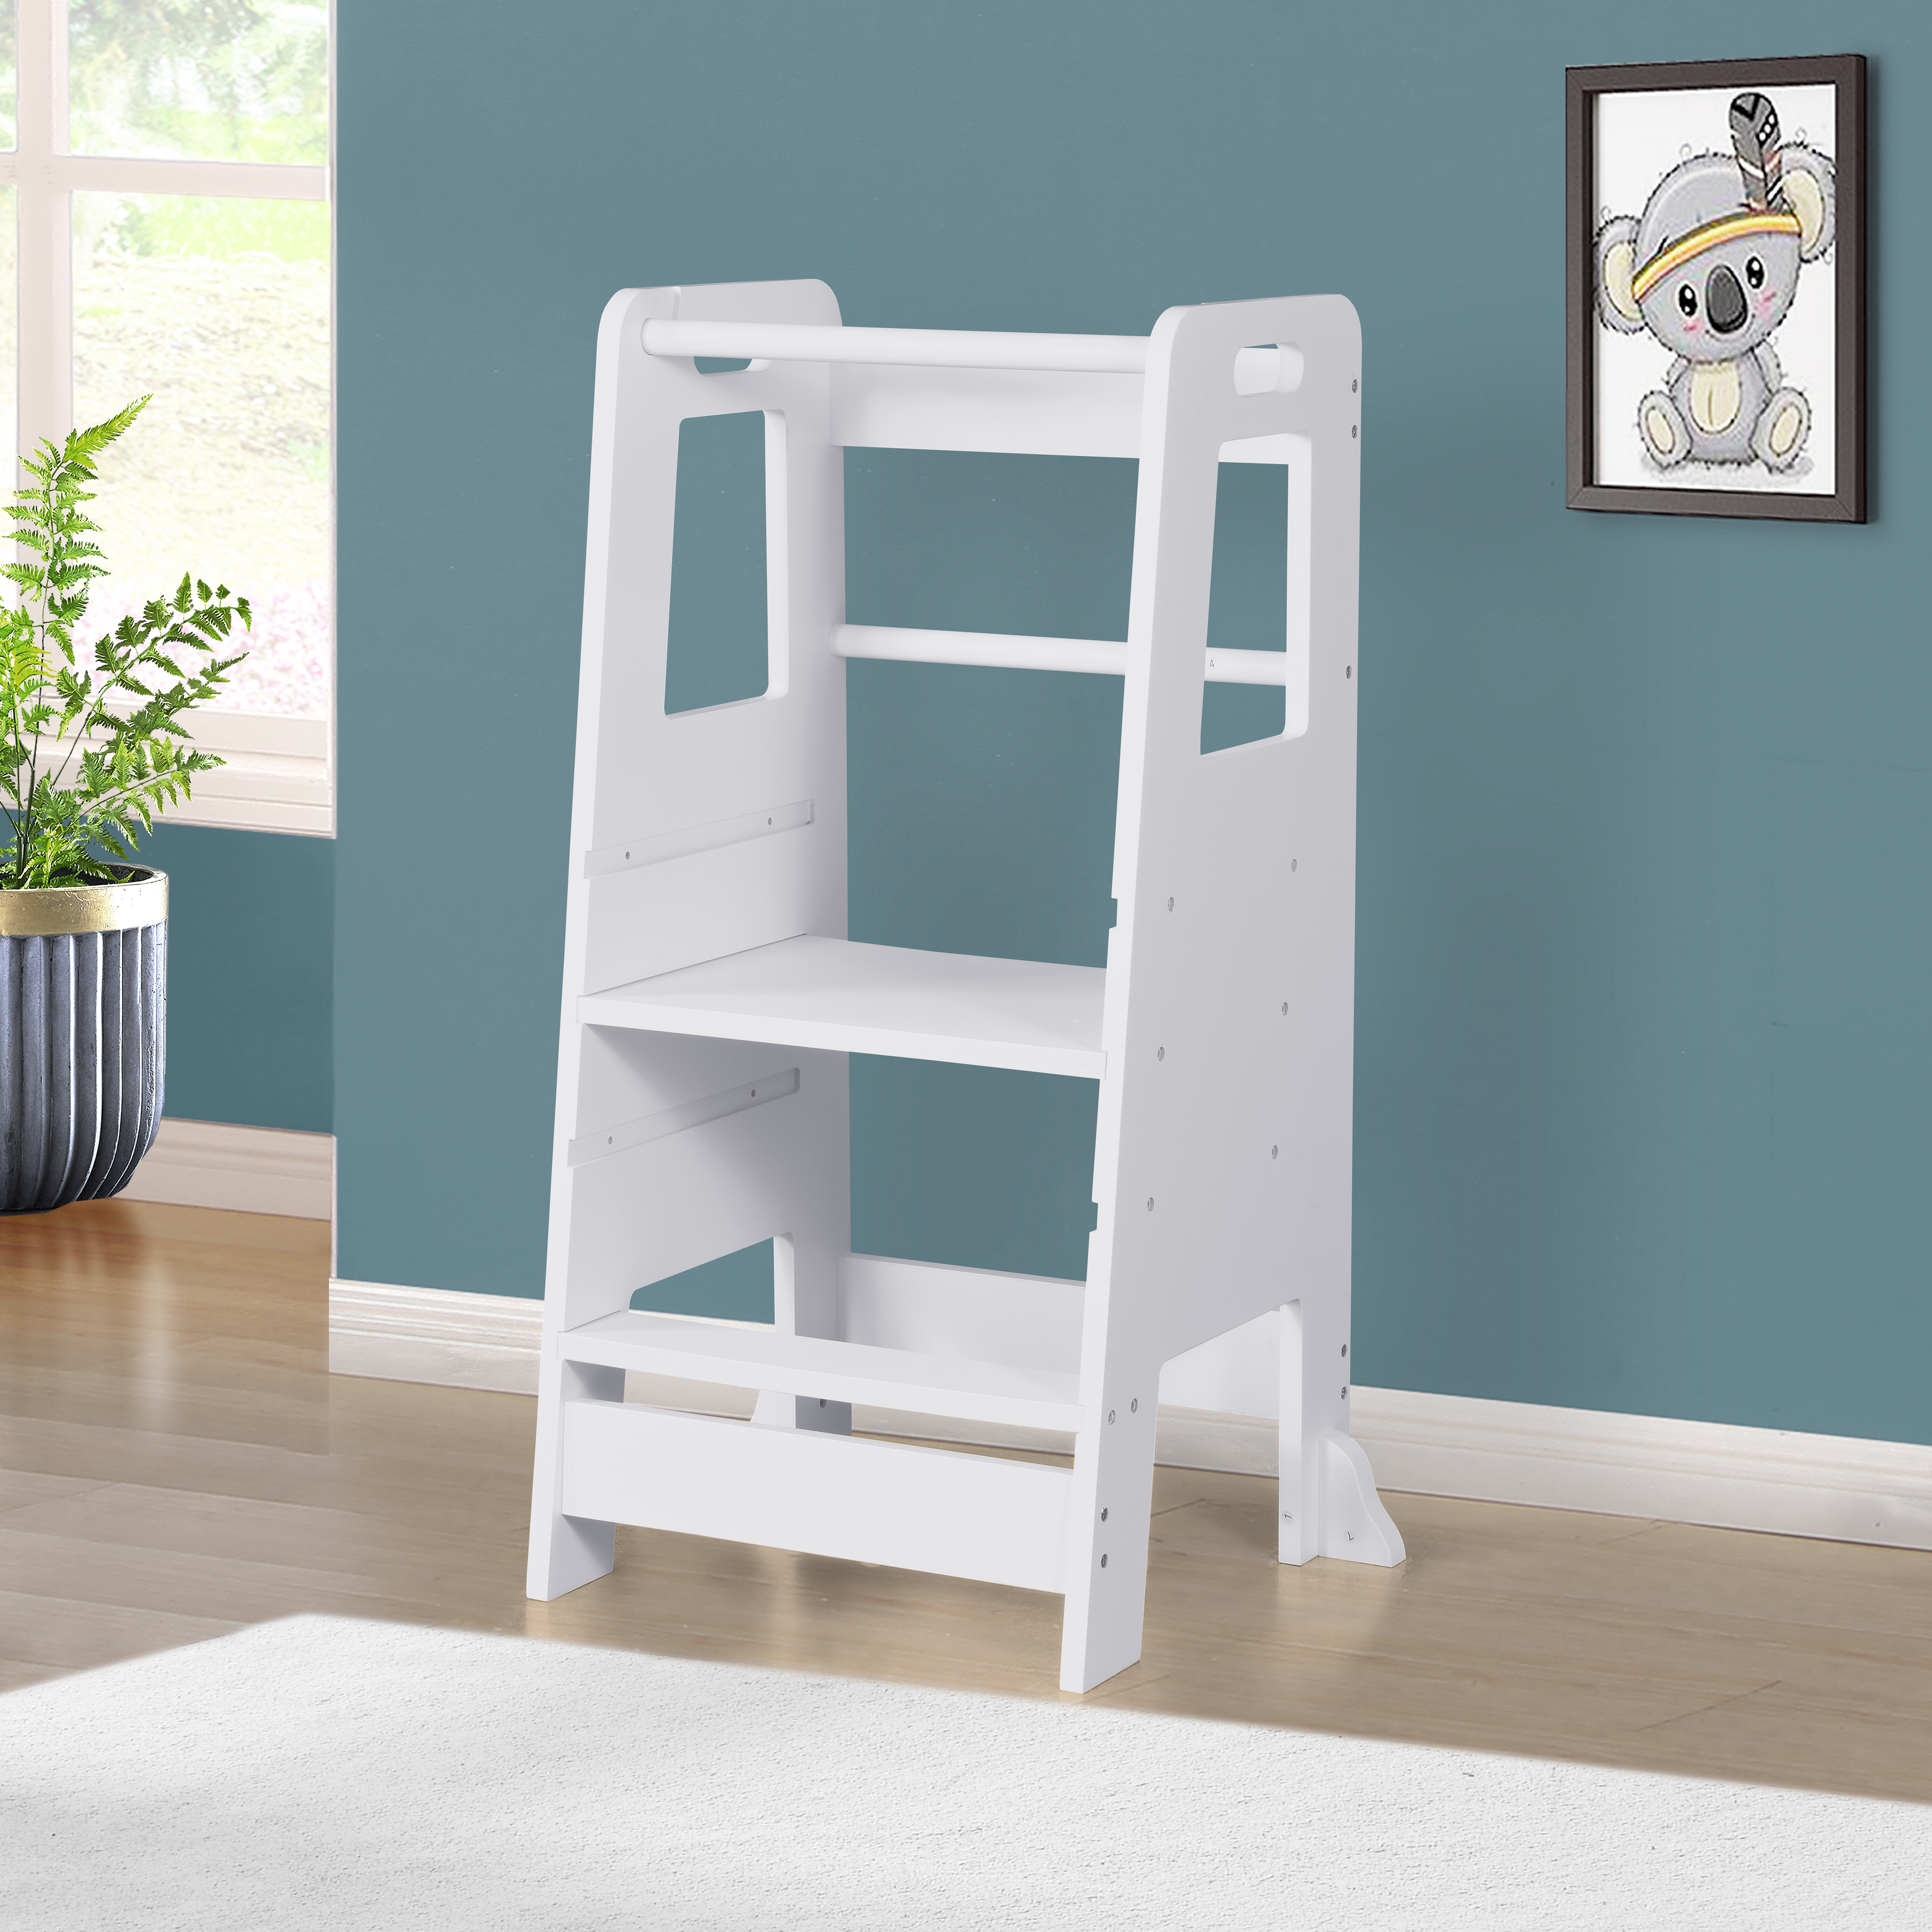 Child Standing Tower, Step Stools for Kids, Toddler Step Stool for Kitchen Counter, The Original Kitchen Stepping Stool, Adjustable Platform, White-CASAINC